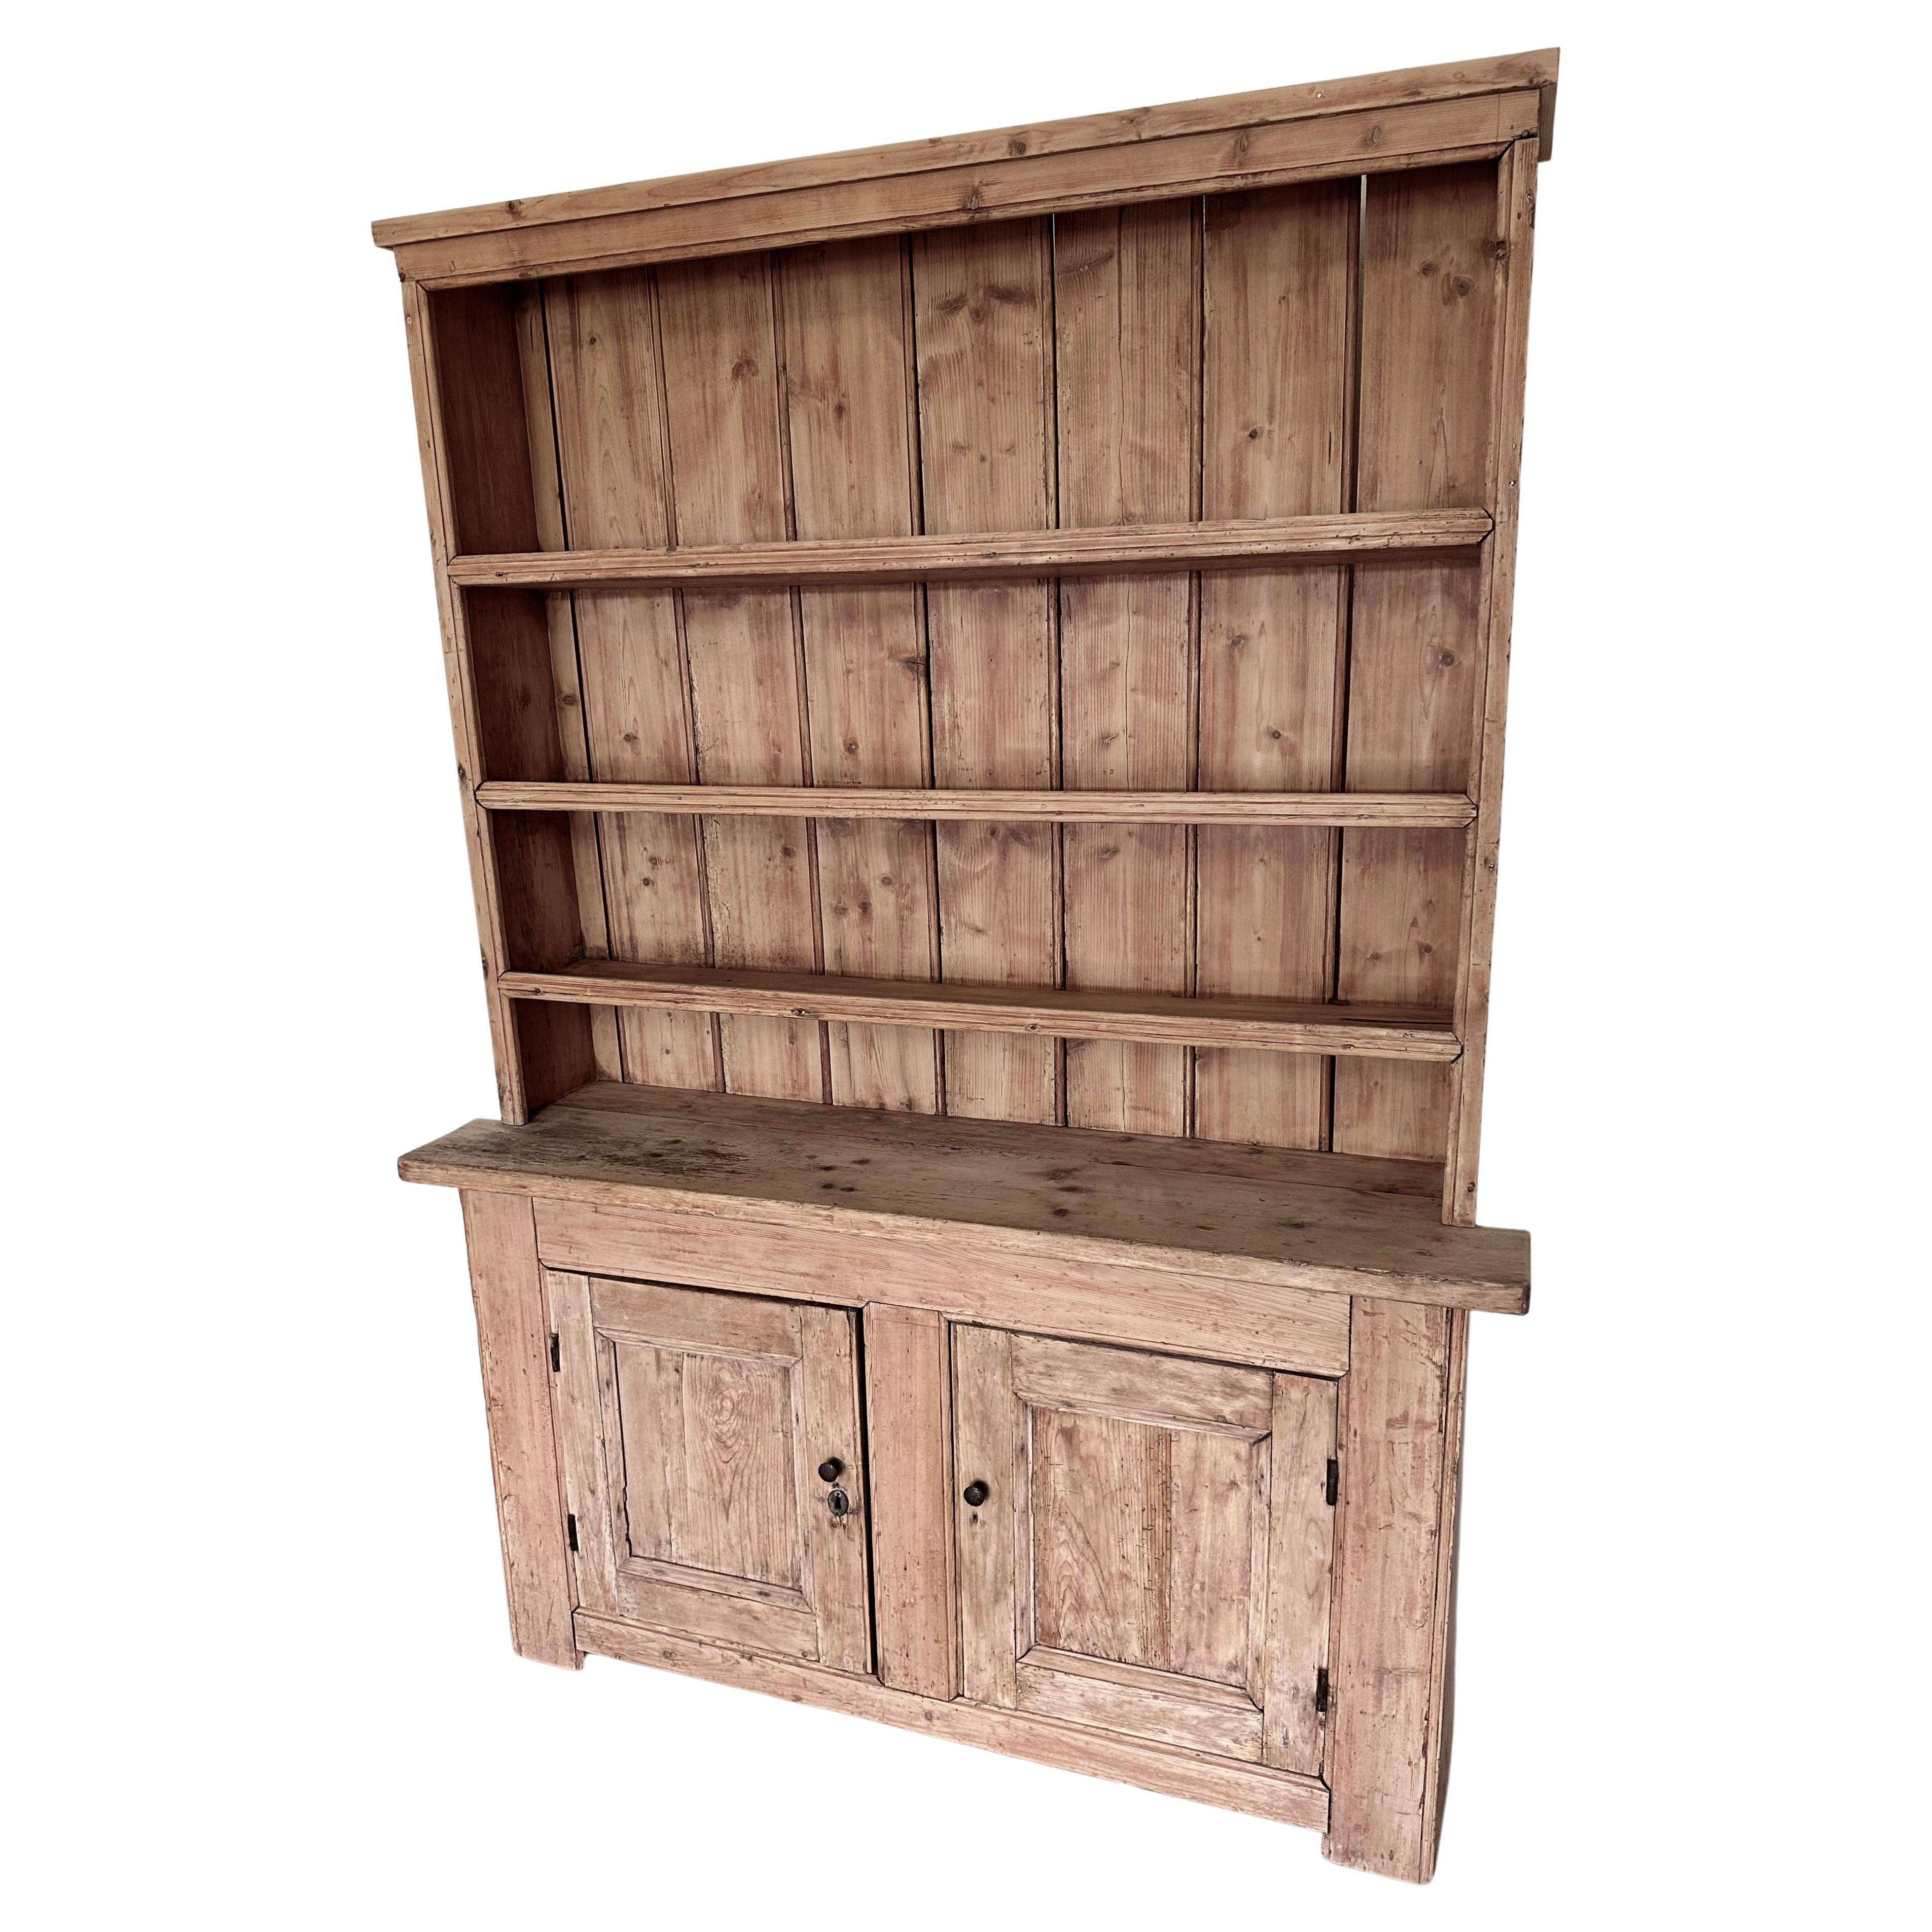 The one piece construction classic country farmhouse style antique pine hutch has wonderful aged patina with plenty of character and charm. Its very narrow 14